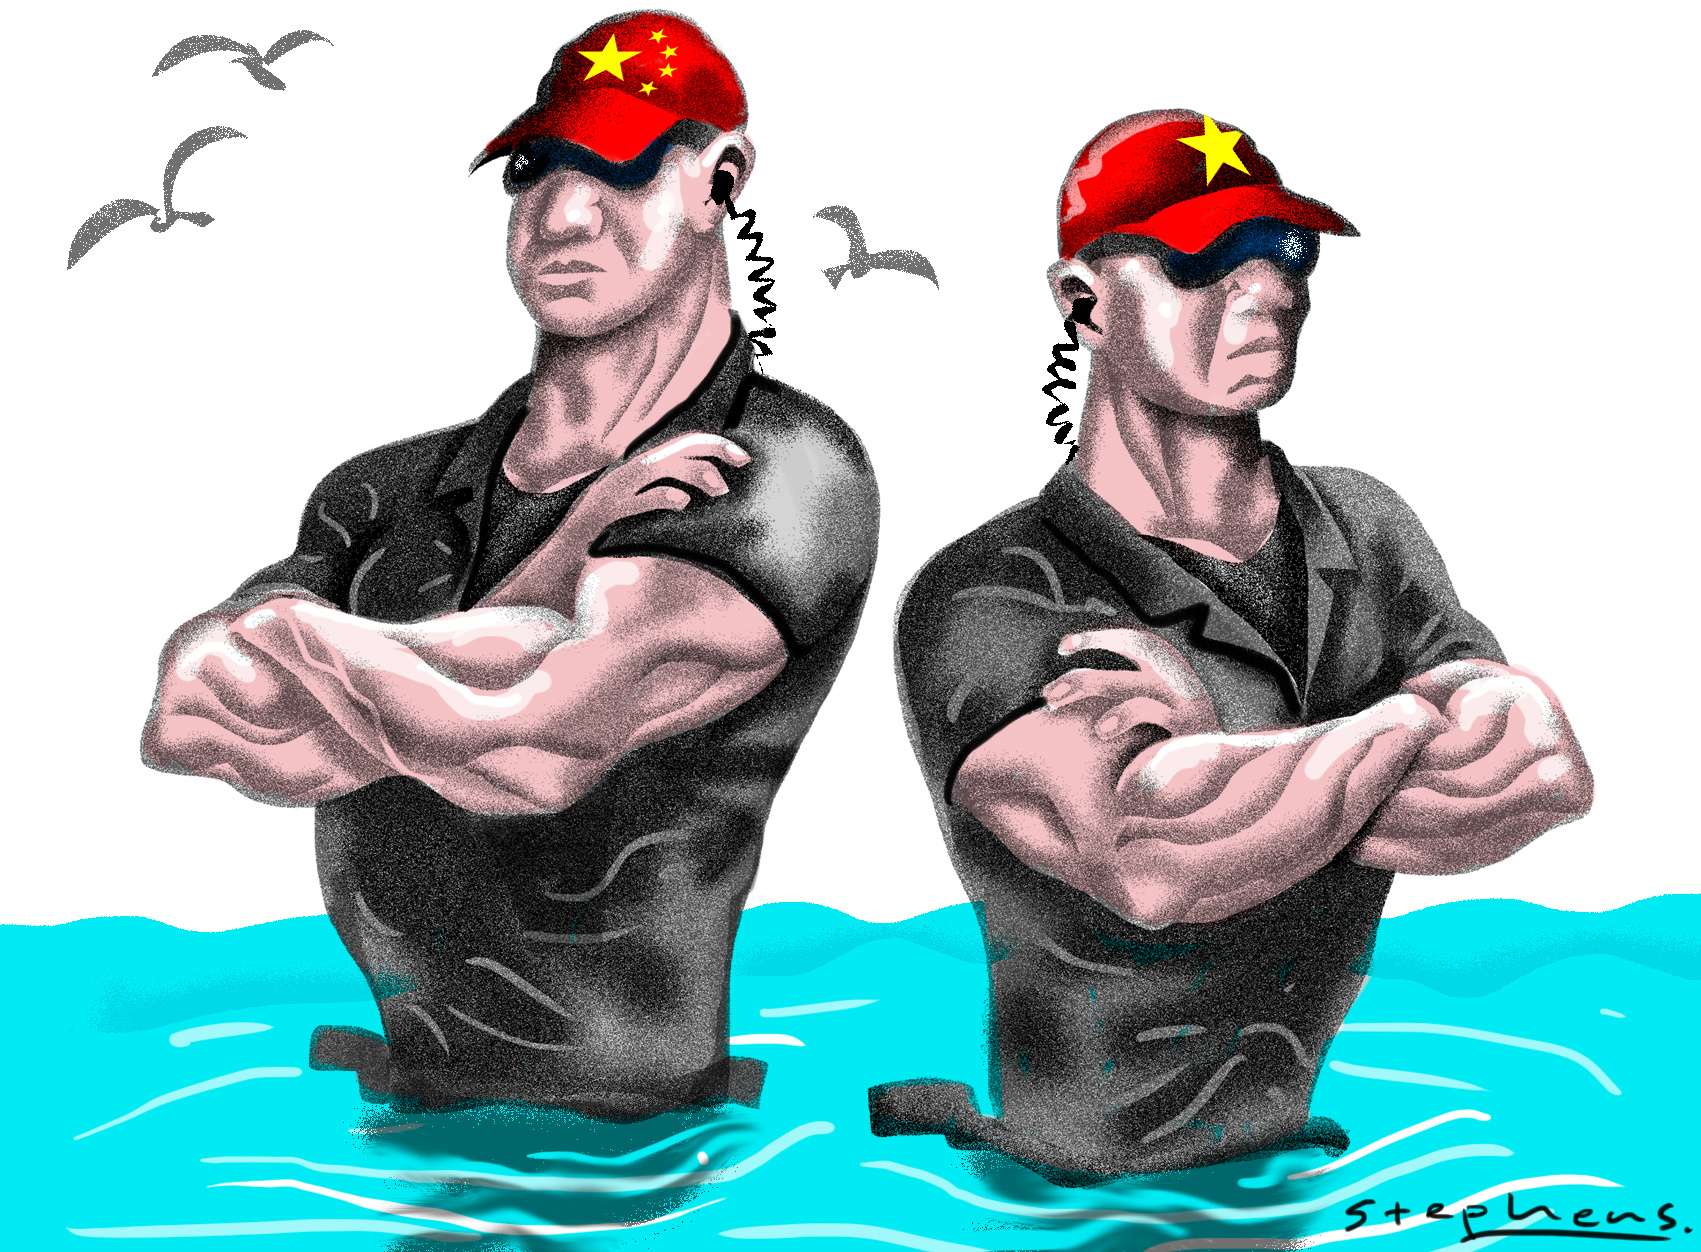 Josef Gregory Mahoney and Maximilian Mayer say the security concerns that probably lie at the heart of China’s assertiveness in the South China Sea can be allayed through bilateral cooperation – starting with Vietnam